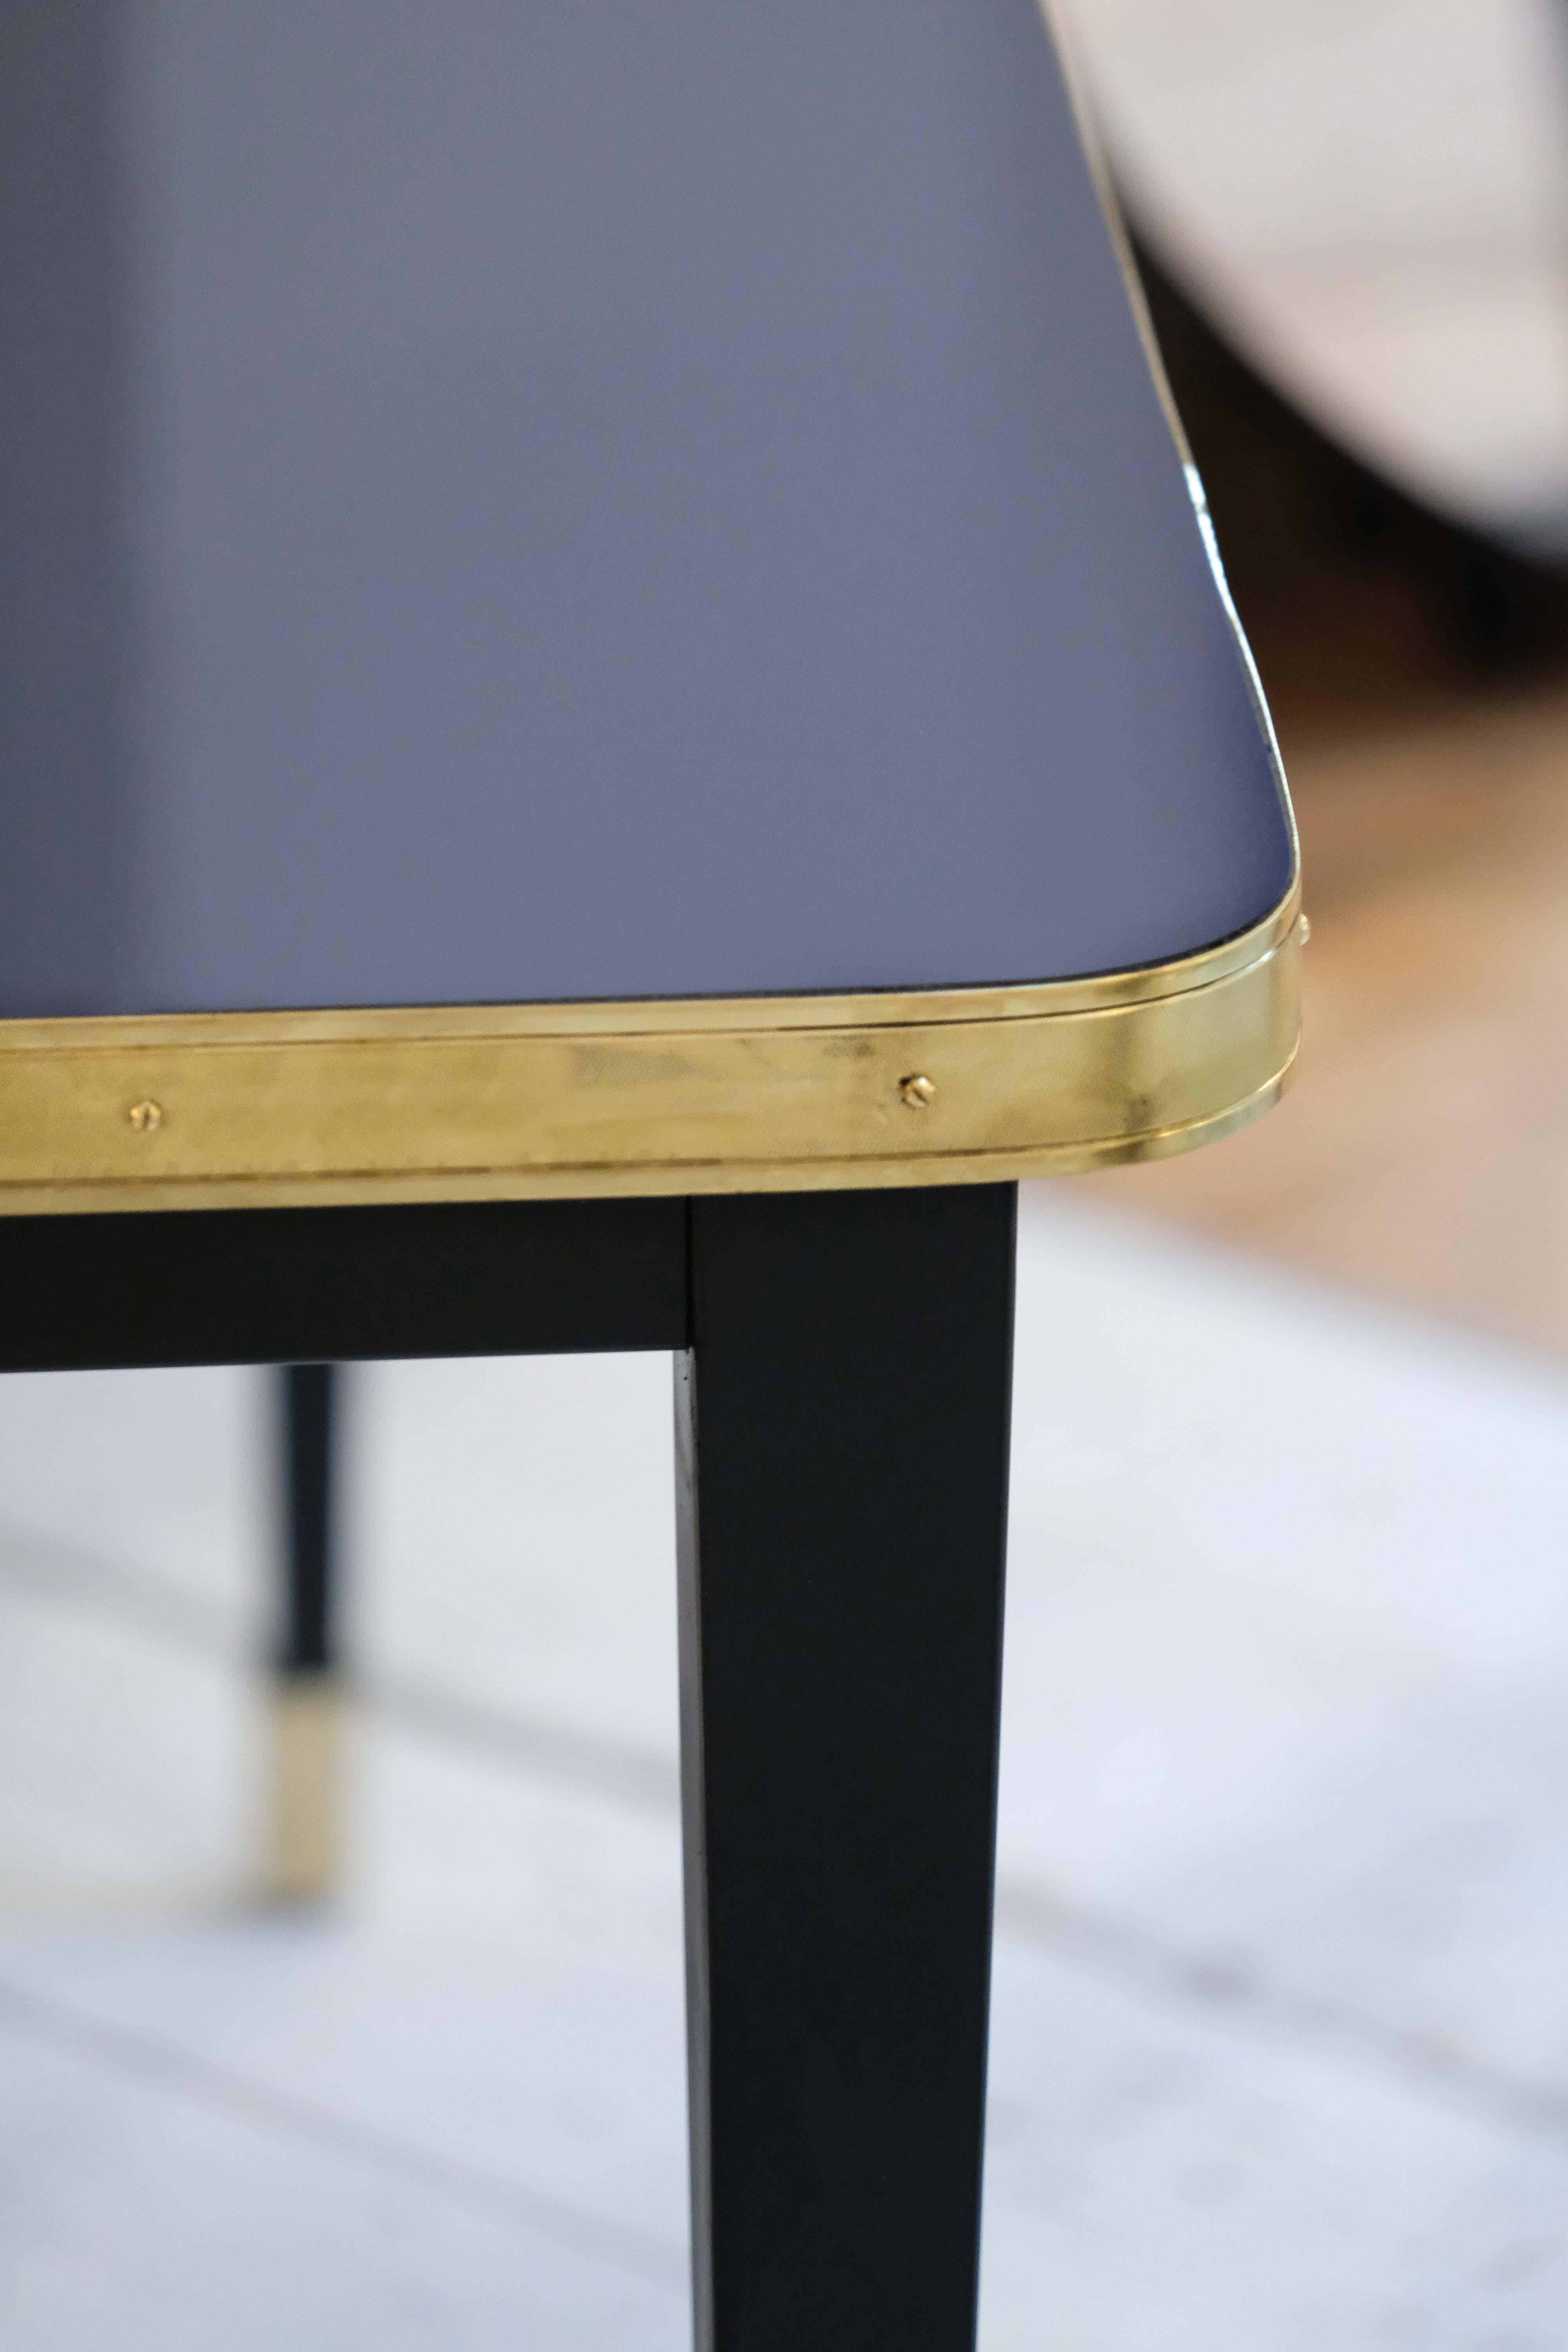 Squared Table High Gloss Top Brass Tape Framed Black Conic Legs Brass End Medium In New Condition For Sale In Alcoy, Alicante